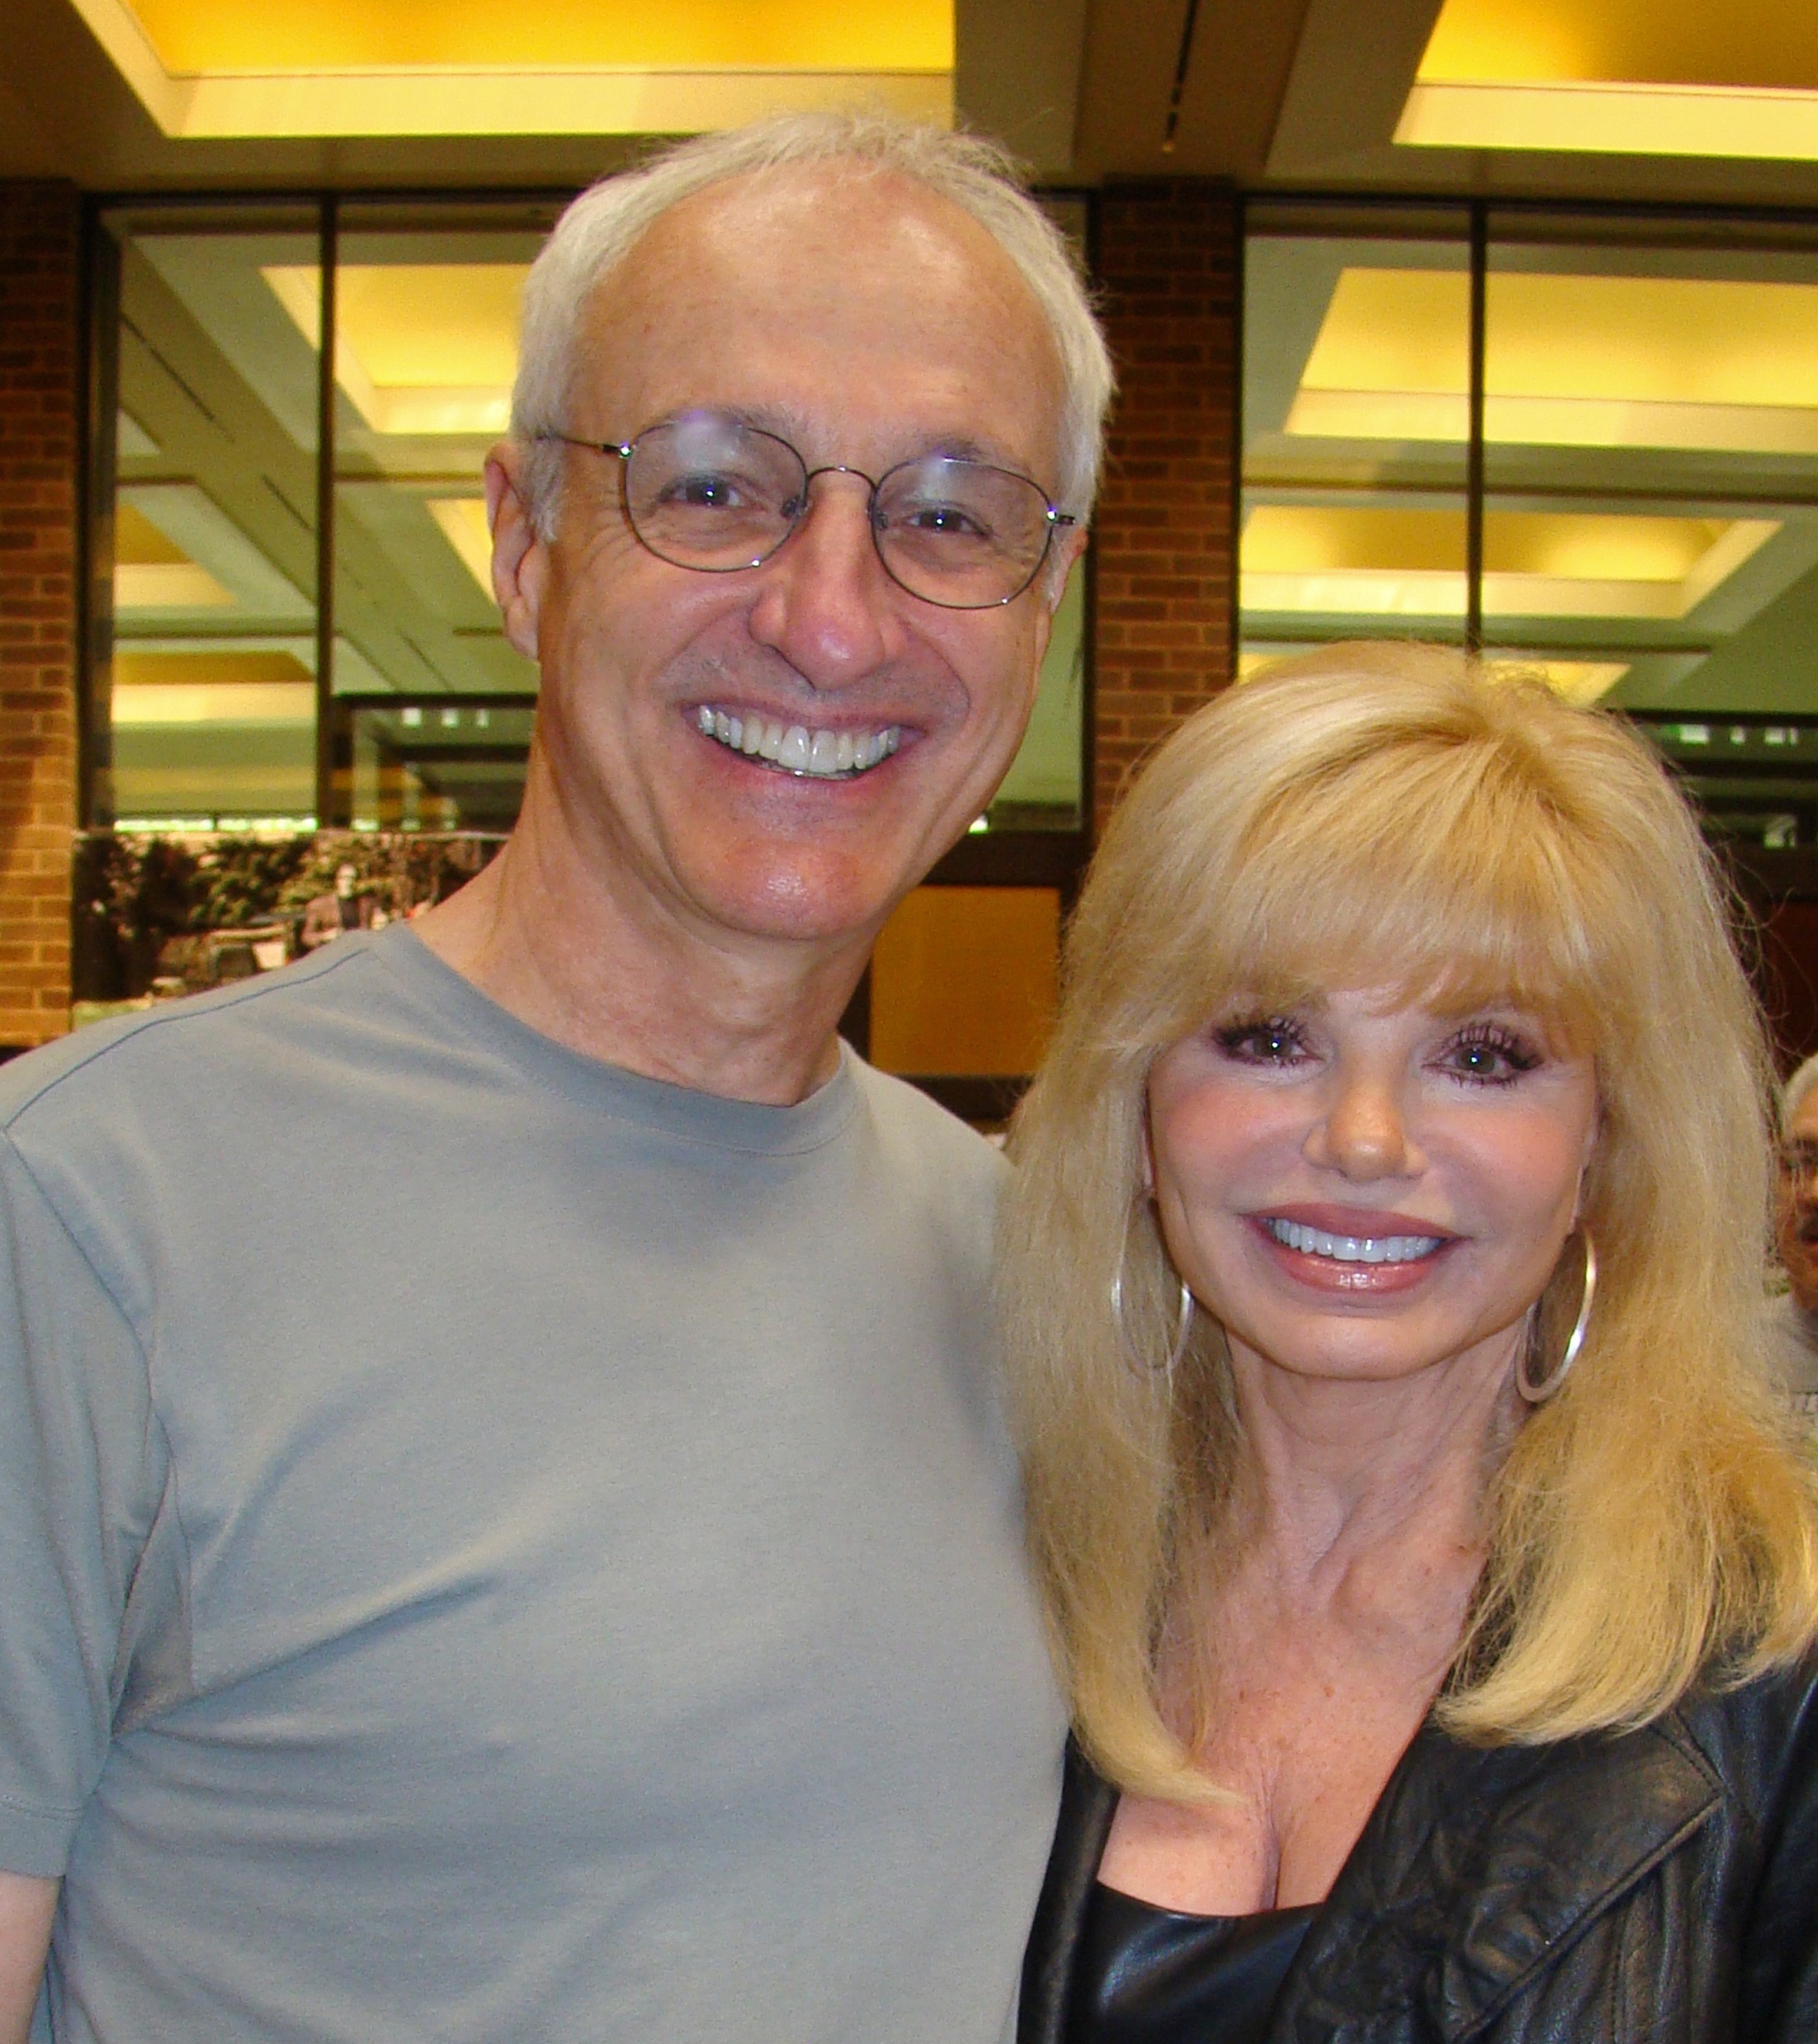 Michael and friend Loni Anderson in April, 2011